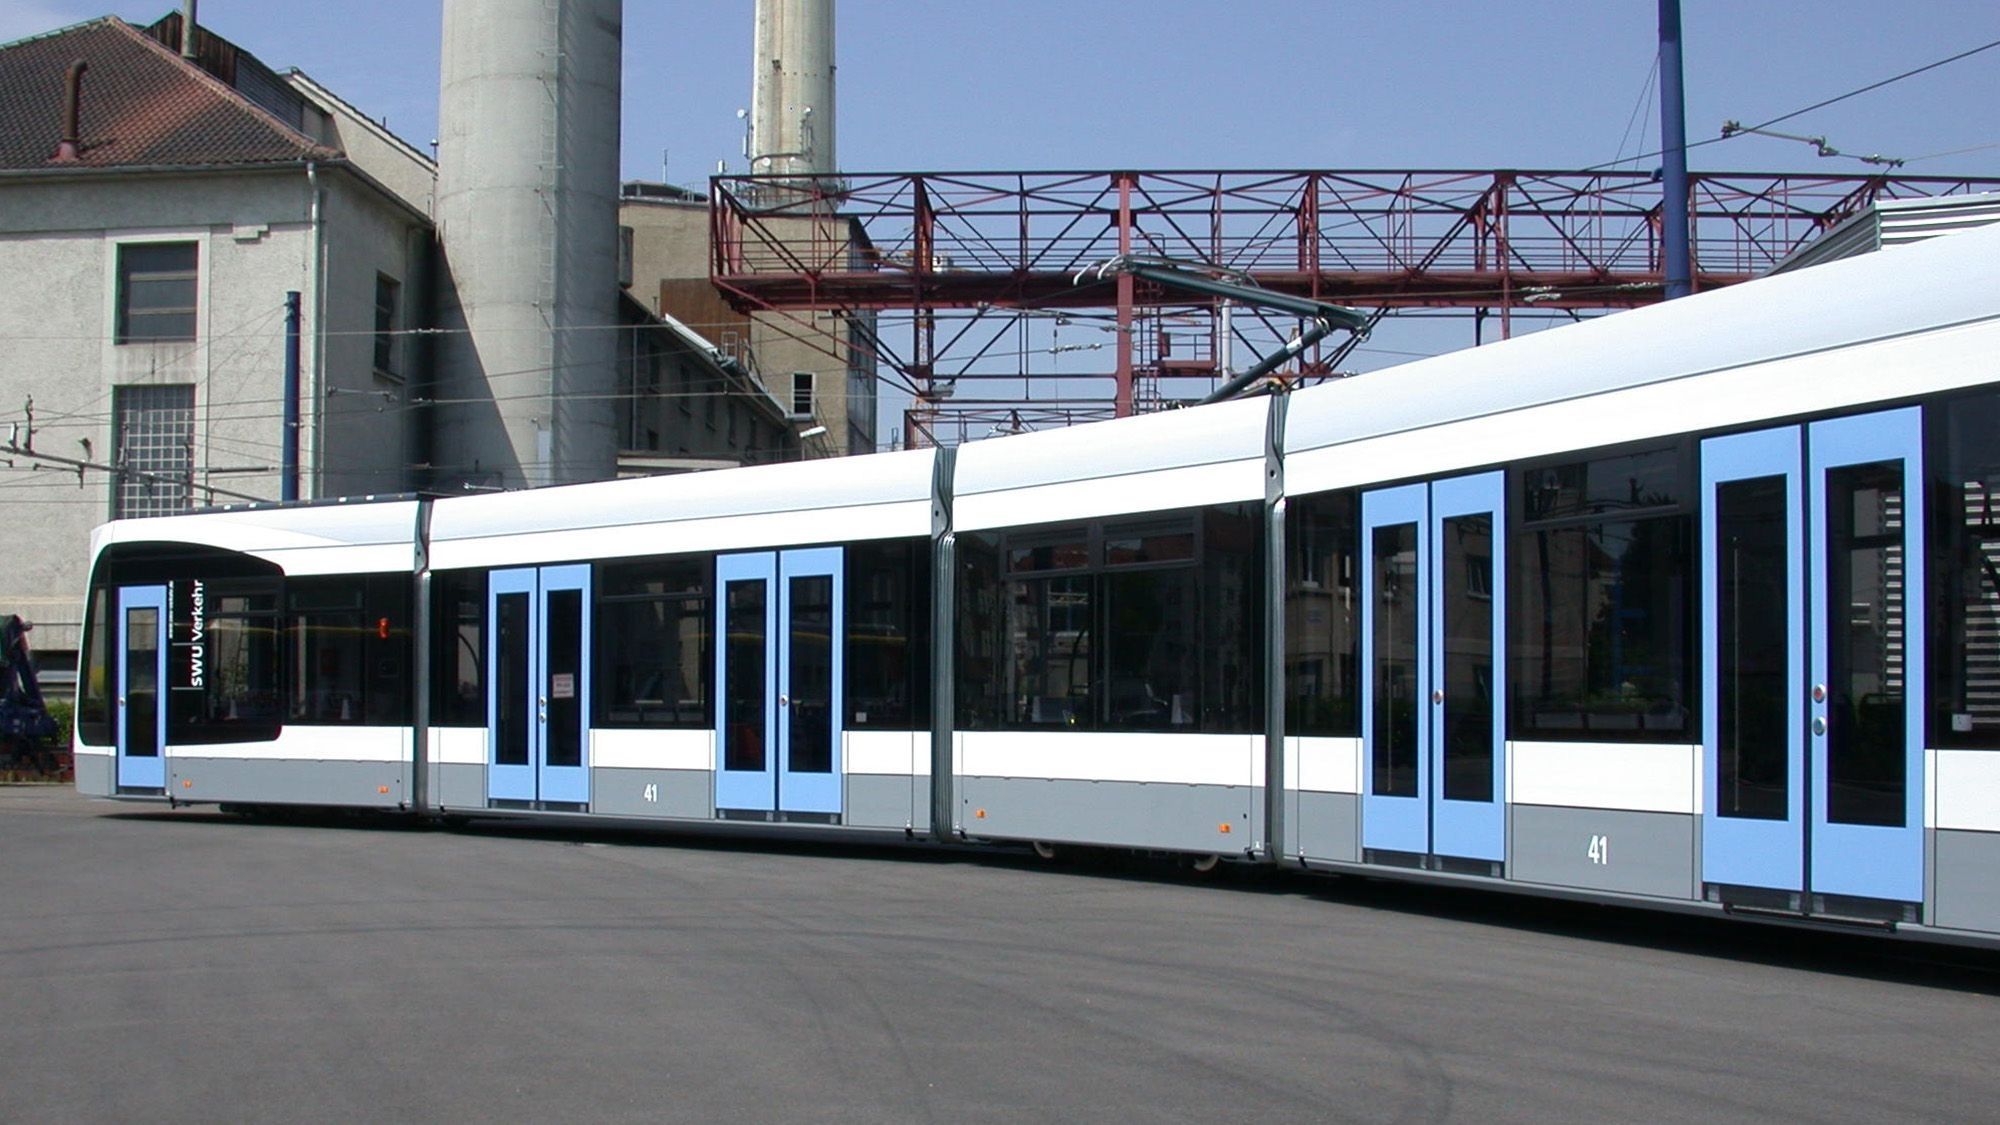 Tramway from the side